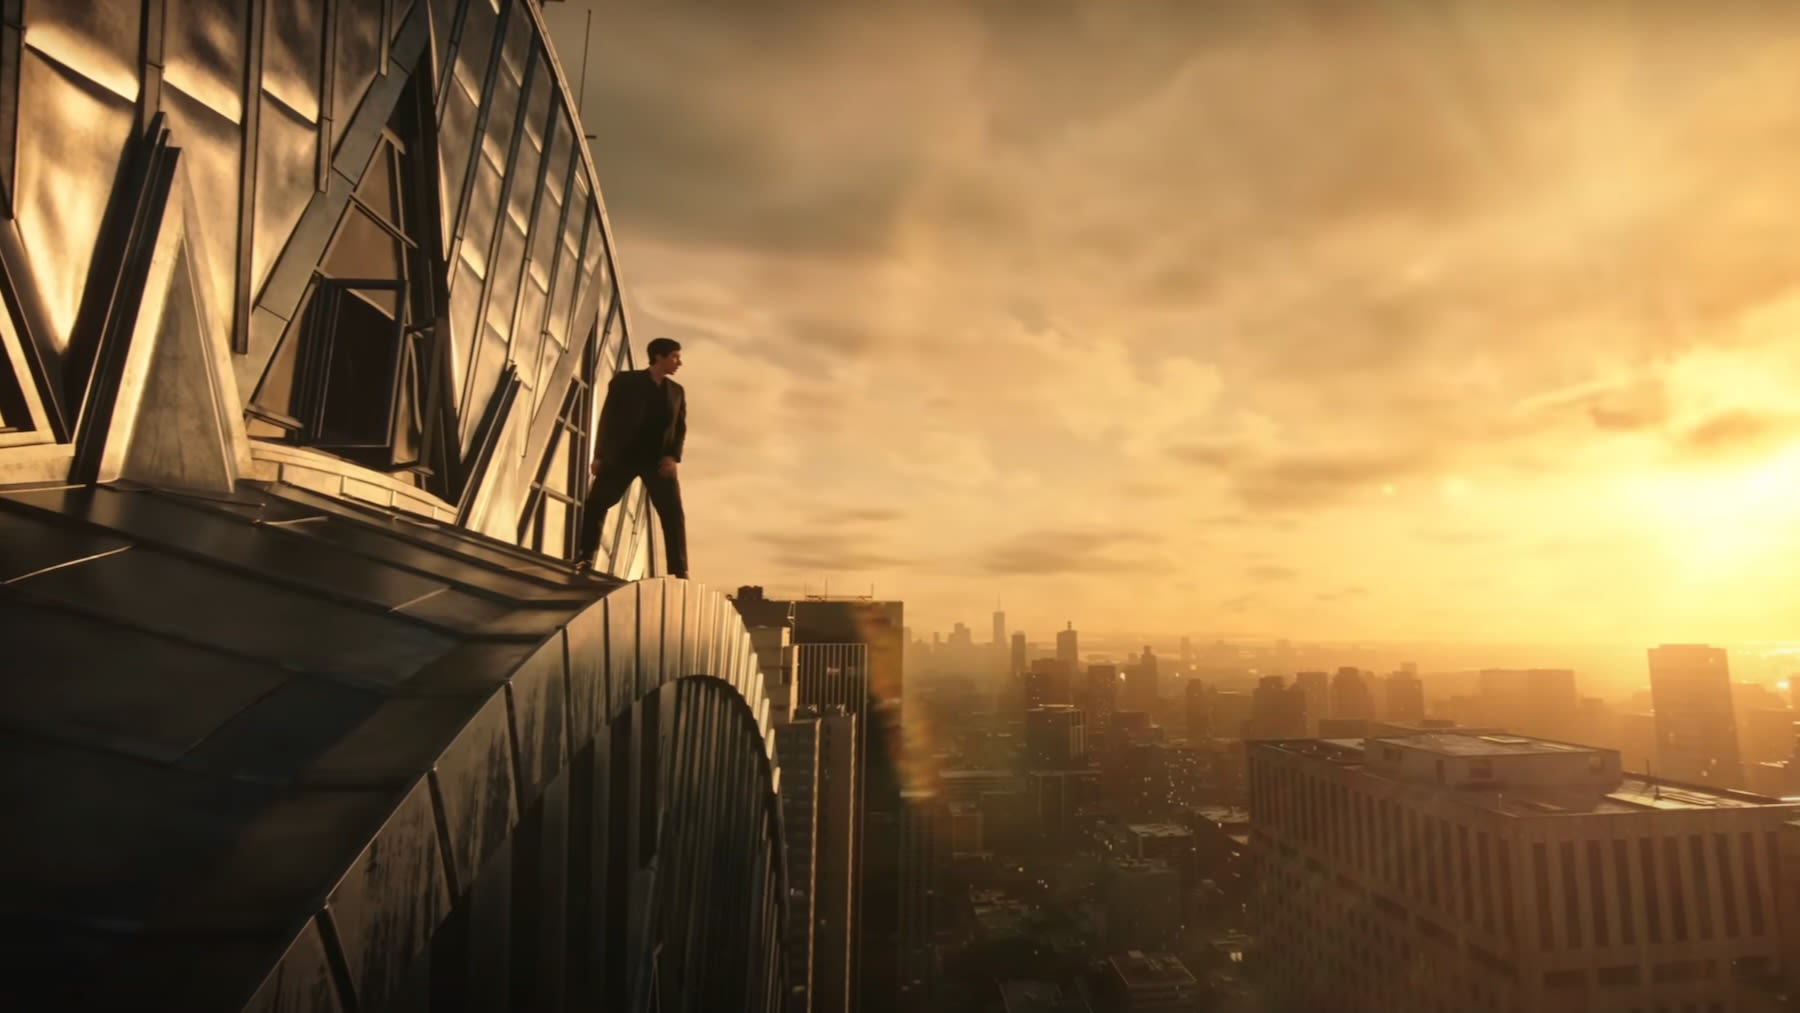 Francis Ford Coppola Unveils Trailer from Self-Funded Sci-Fi Epic Megalopolis: Watch